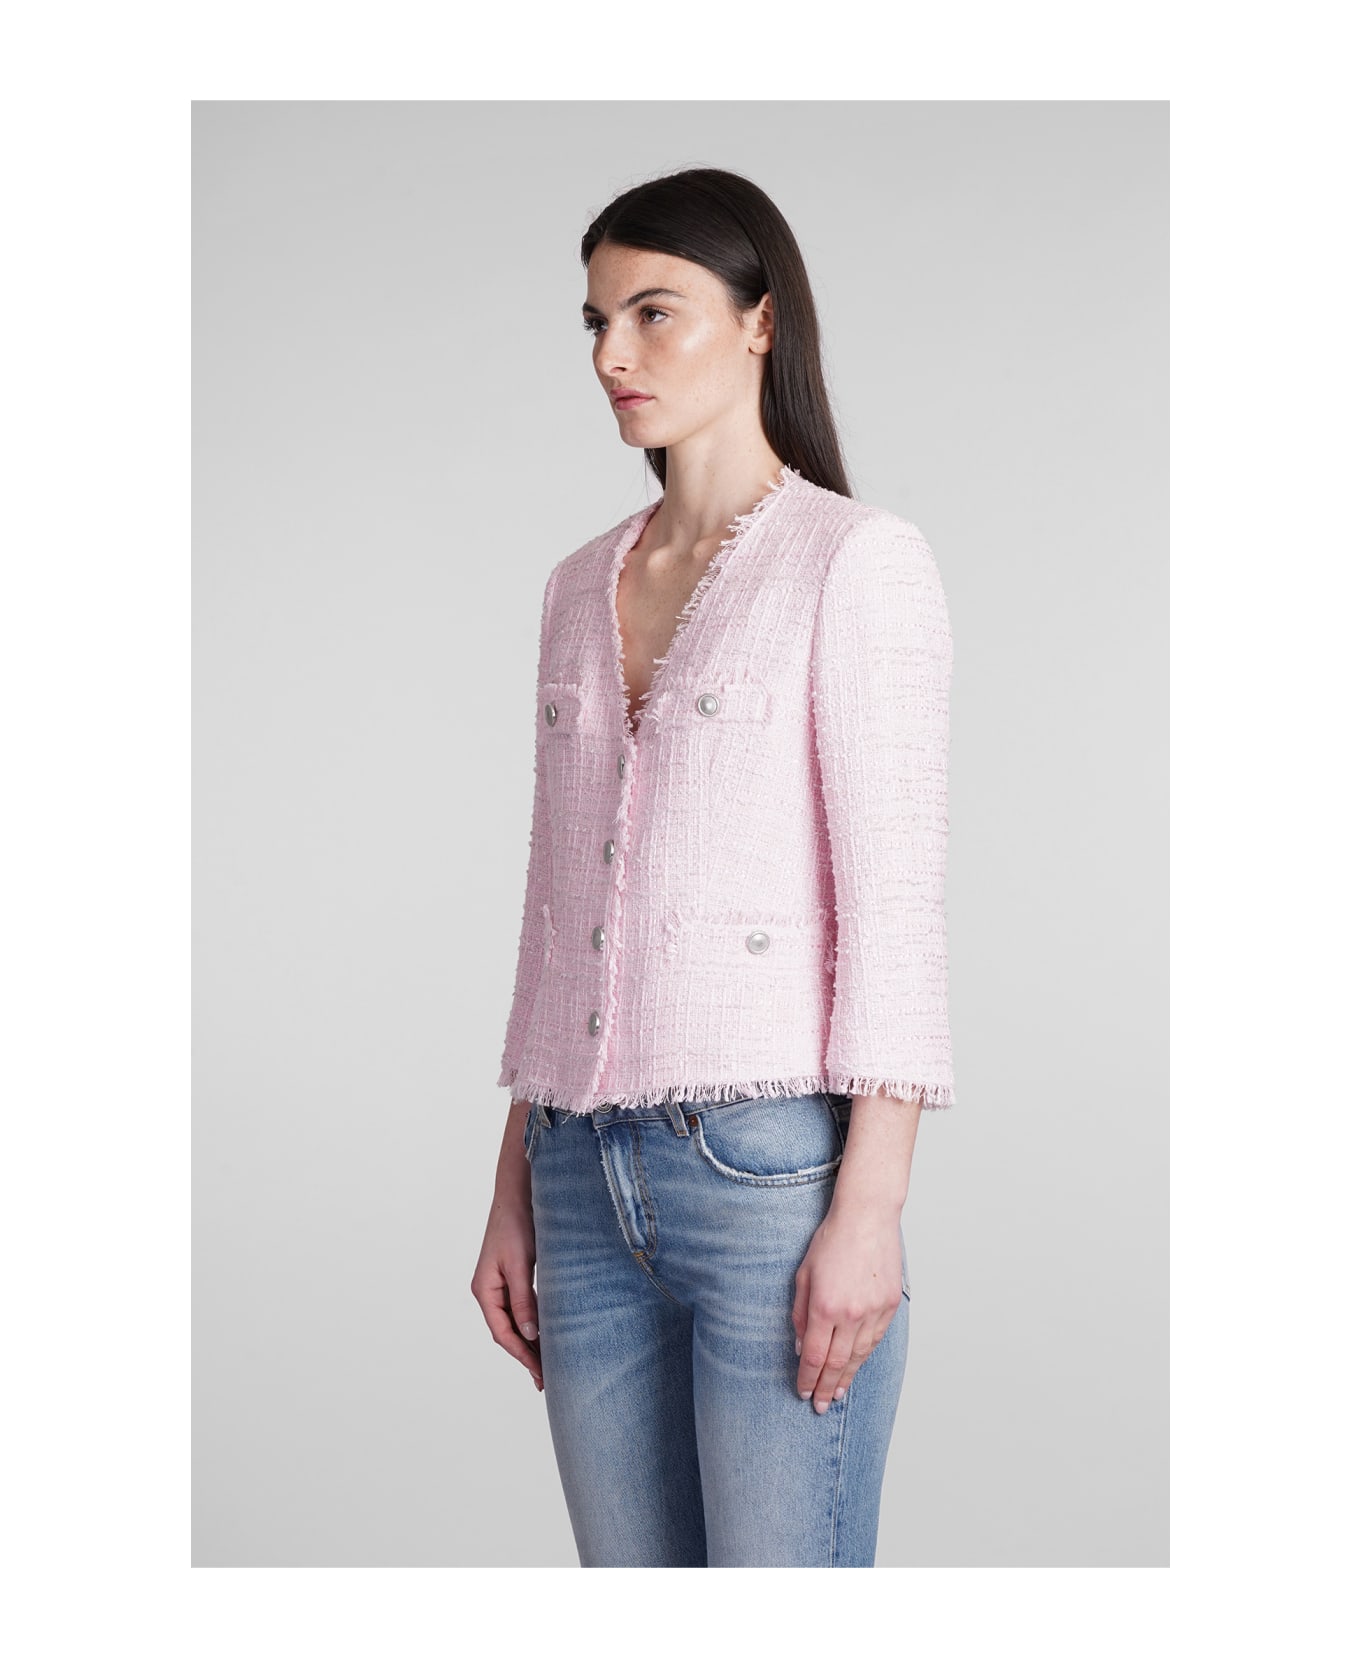 Tagliatore 0205 Dharma Casual Jacket In Rose-pink Cotton - rose-pink